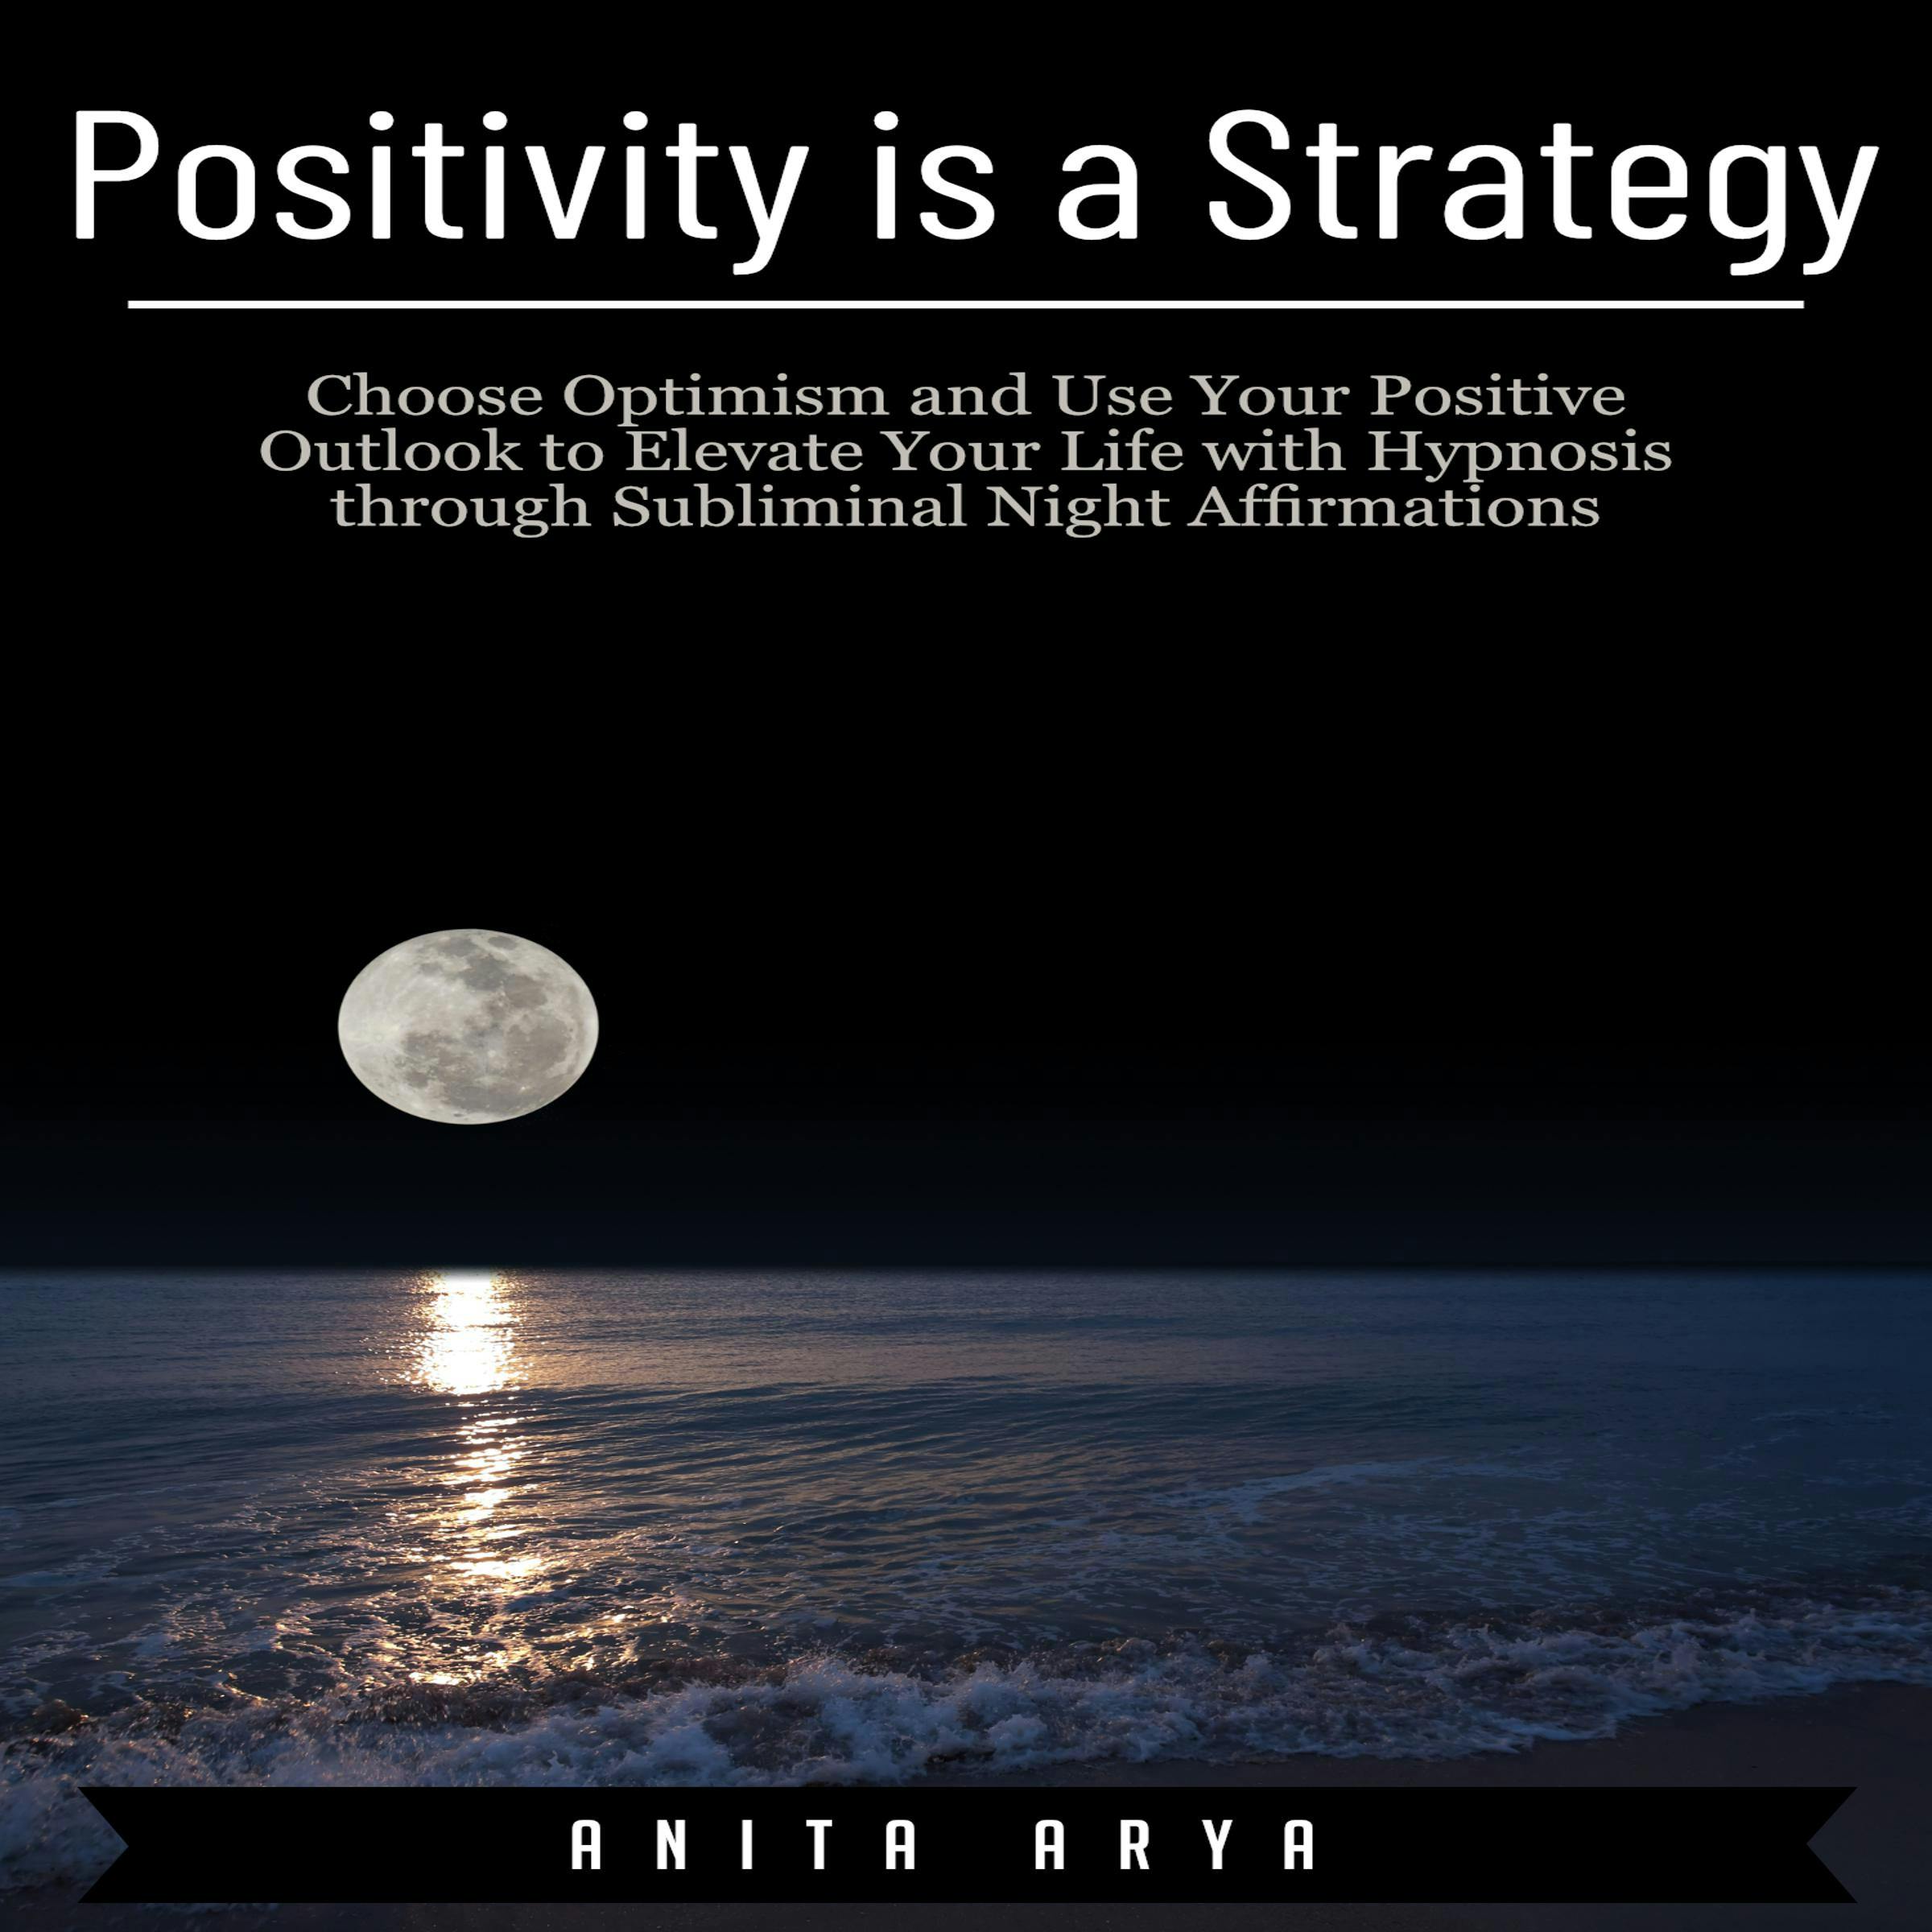 Positivity is a Strategy: Choose Optimism and Use Your Positive Outlook to Elevate Your Life with Hypnosis through Subliminal Night Affirmations - Anita Arya